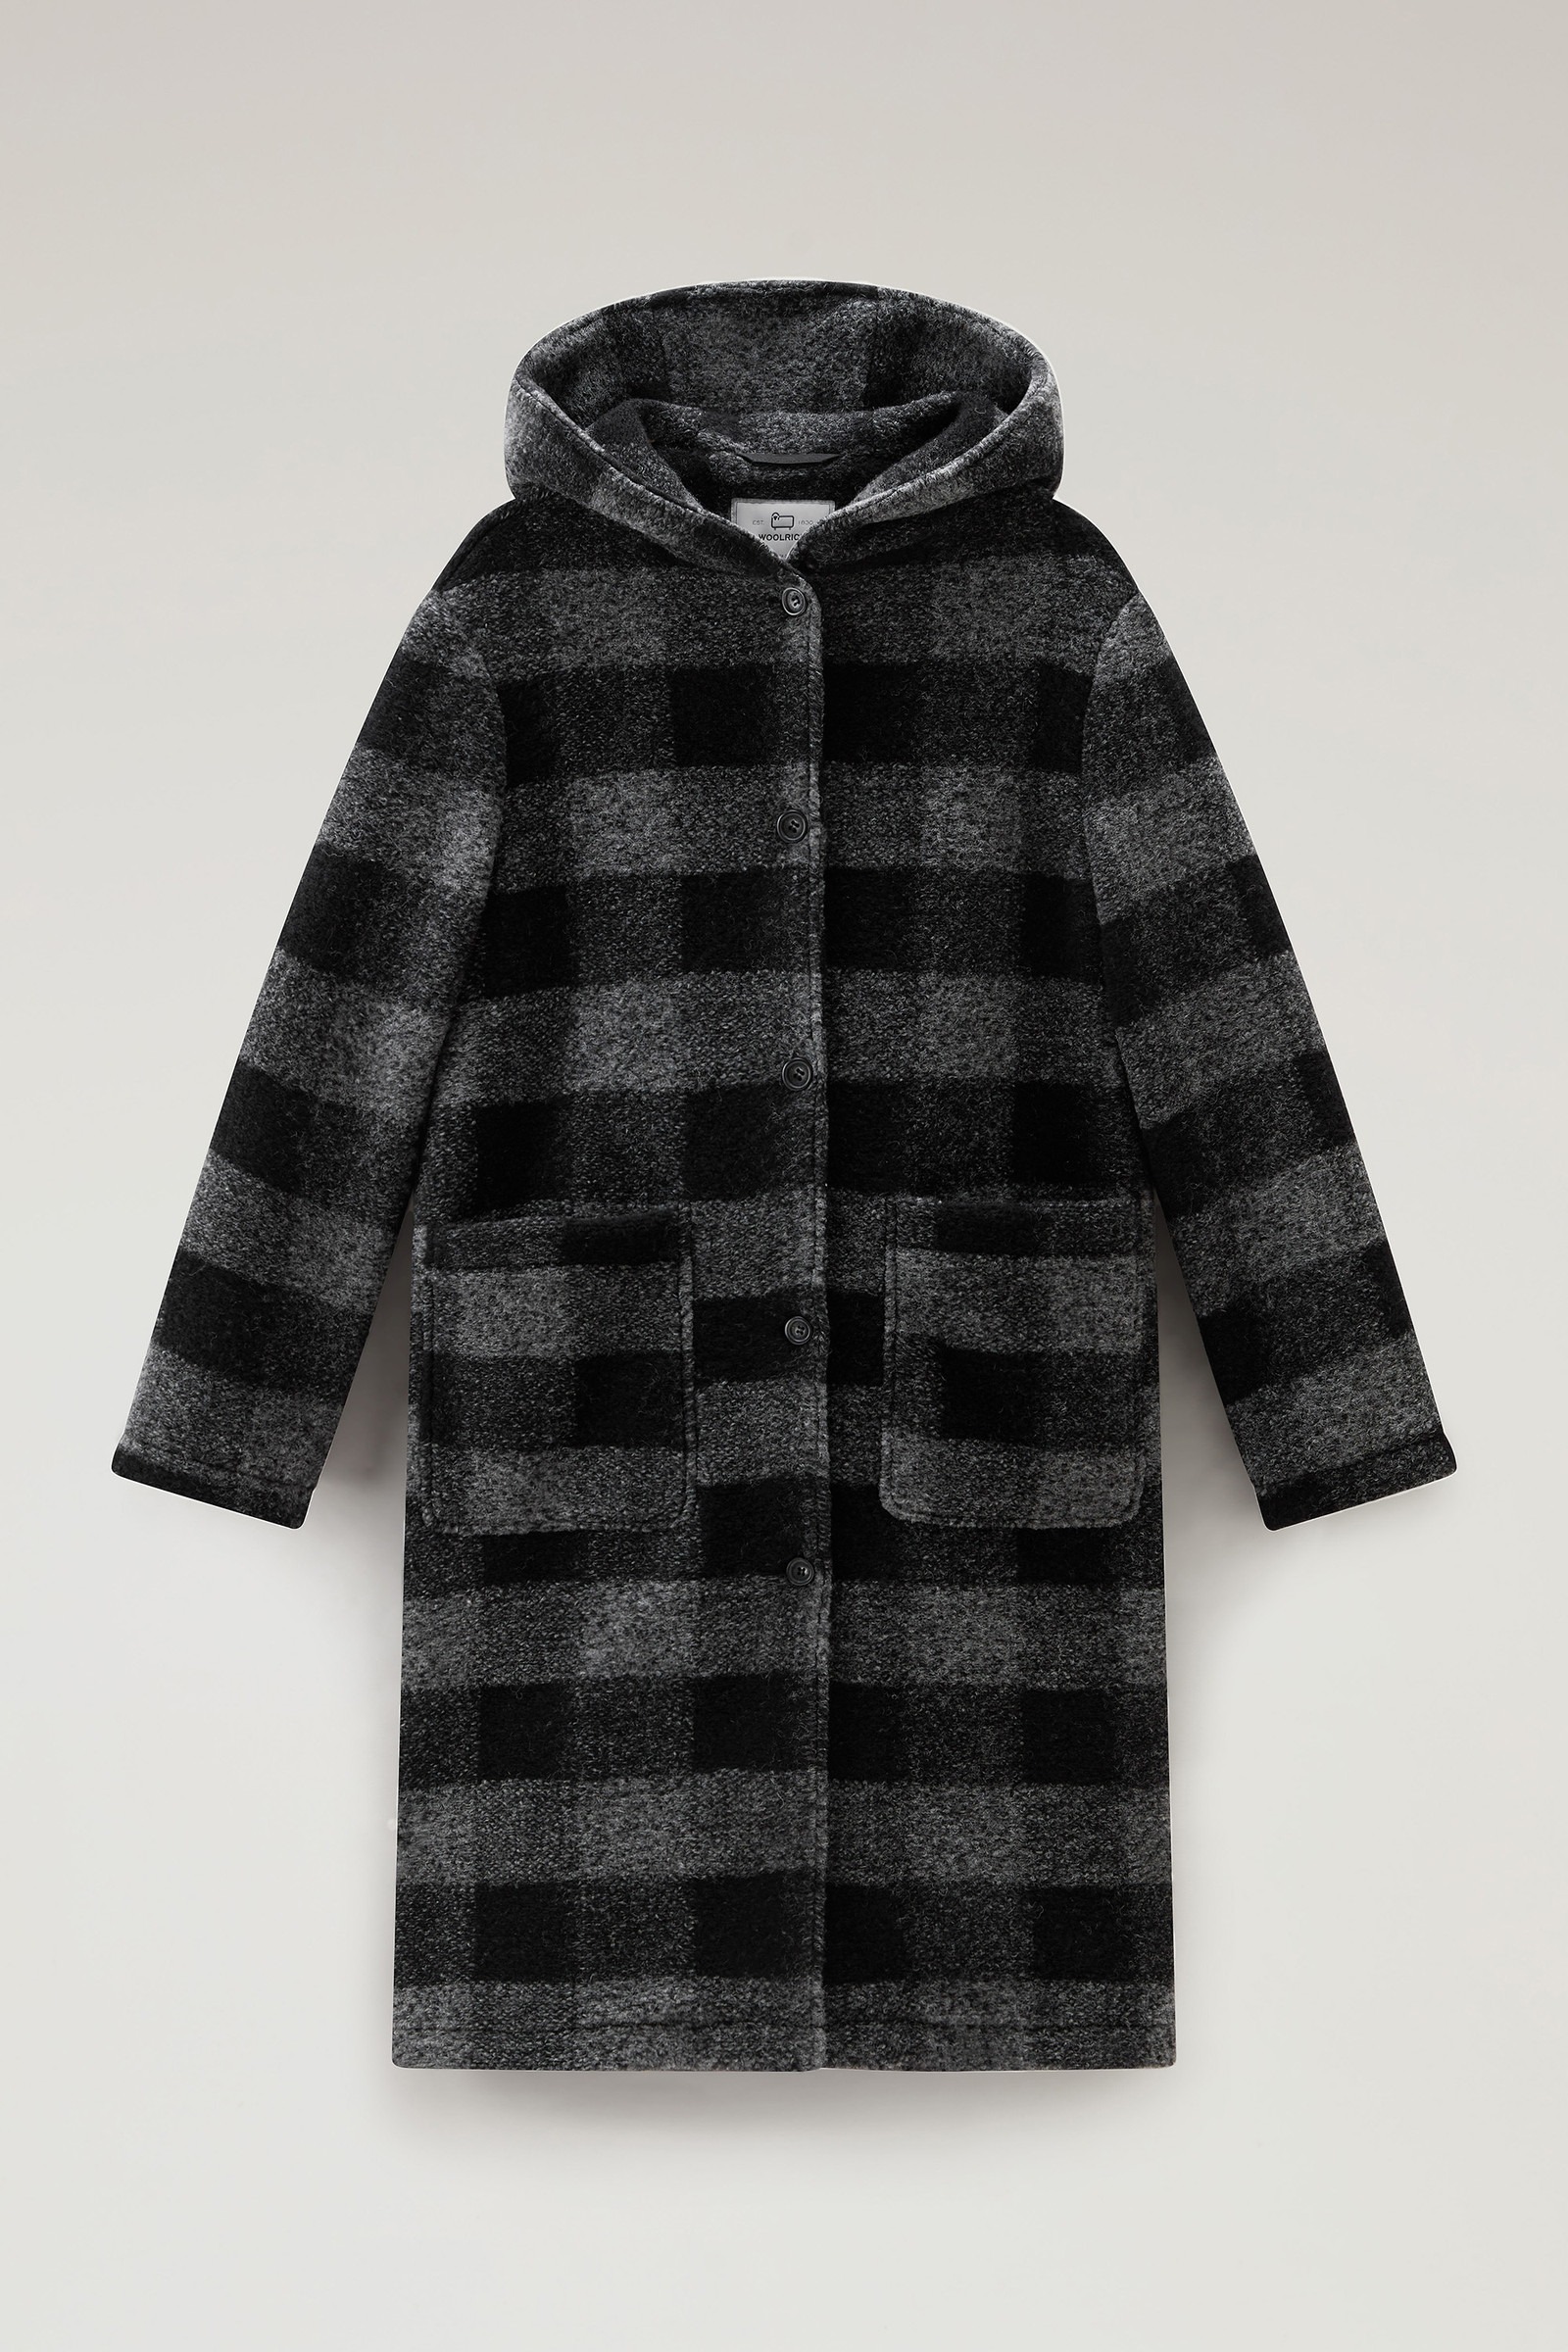 Gentry Coat in Wool Blend with Hood Black | Woolrich USA